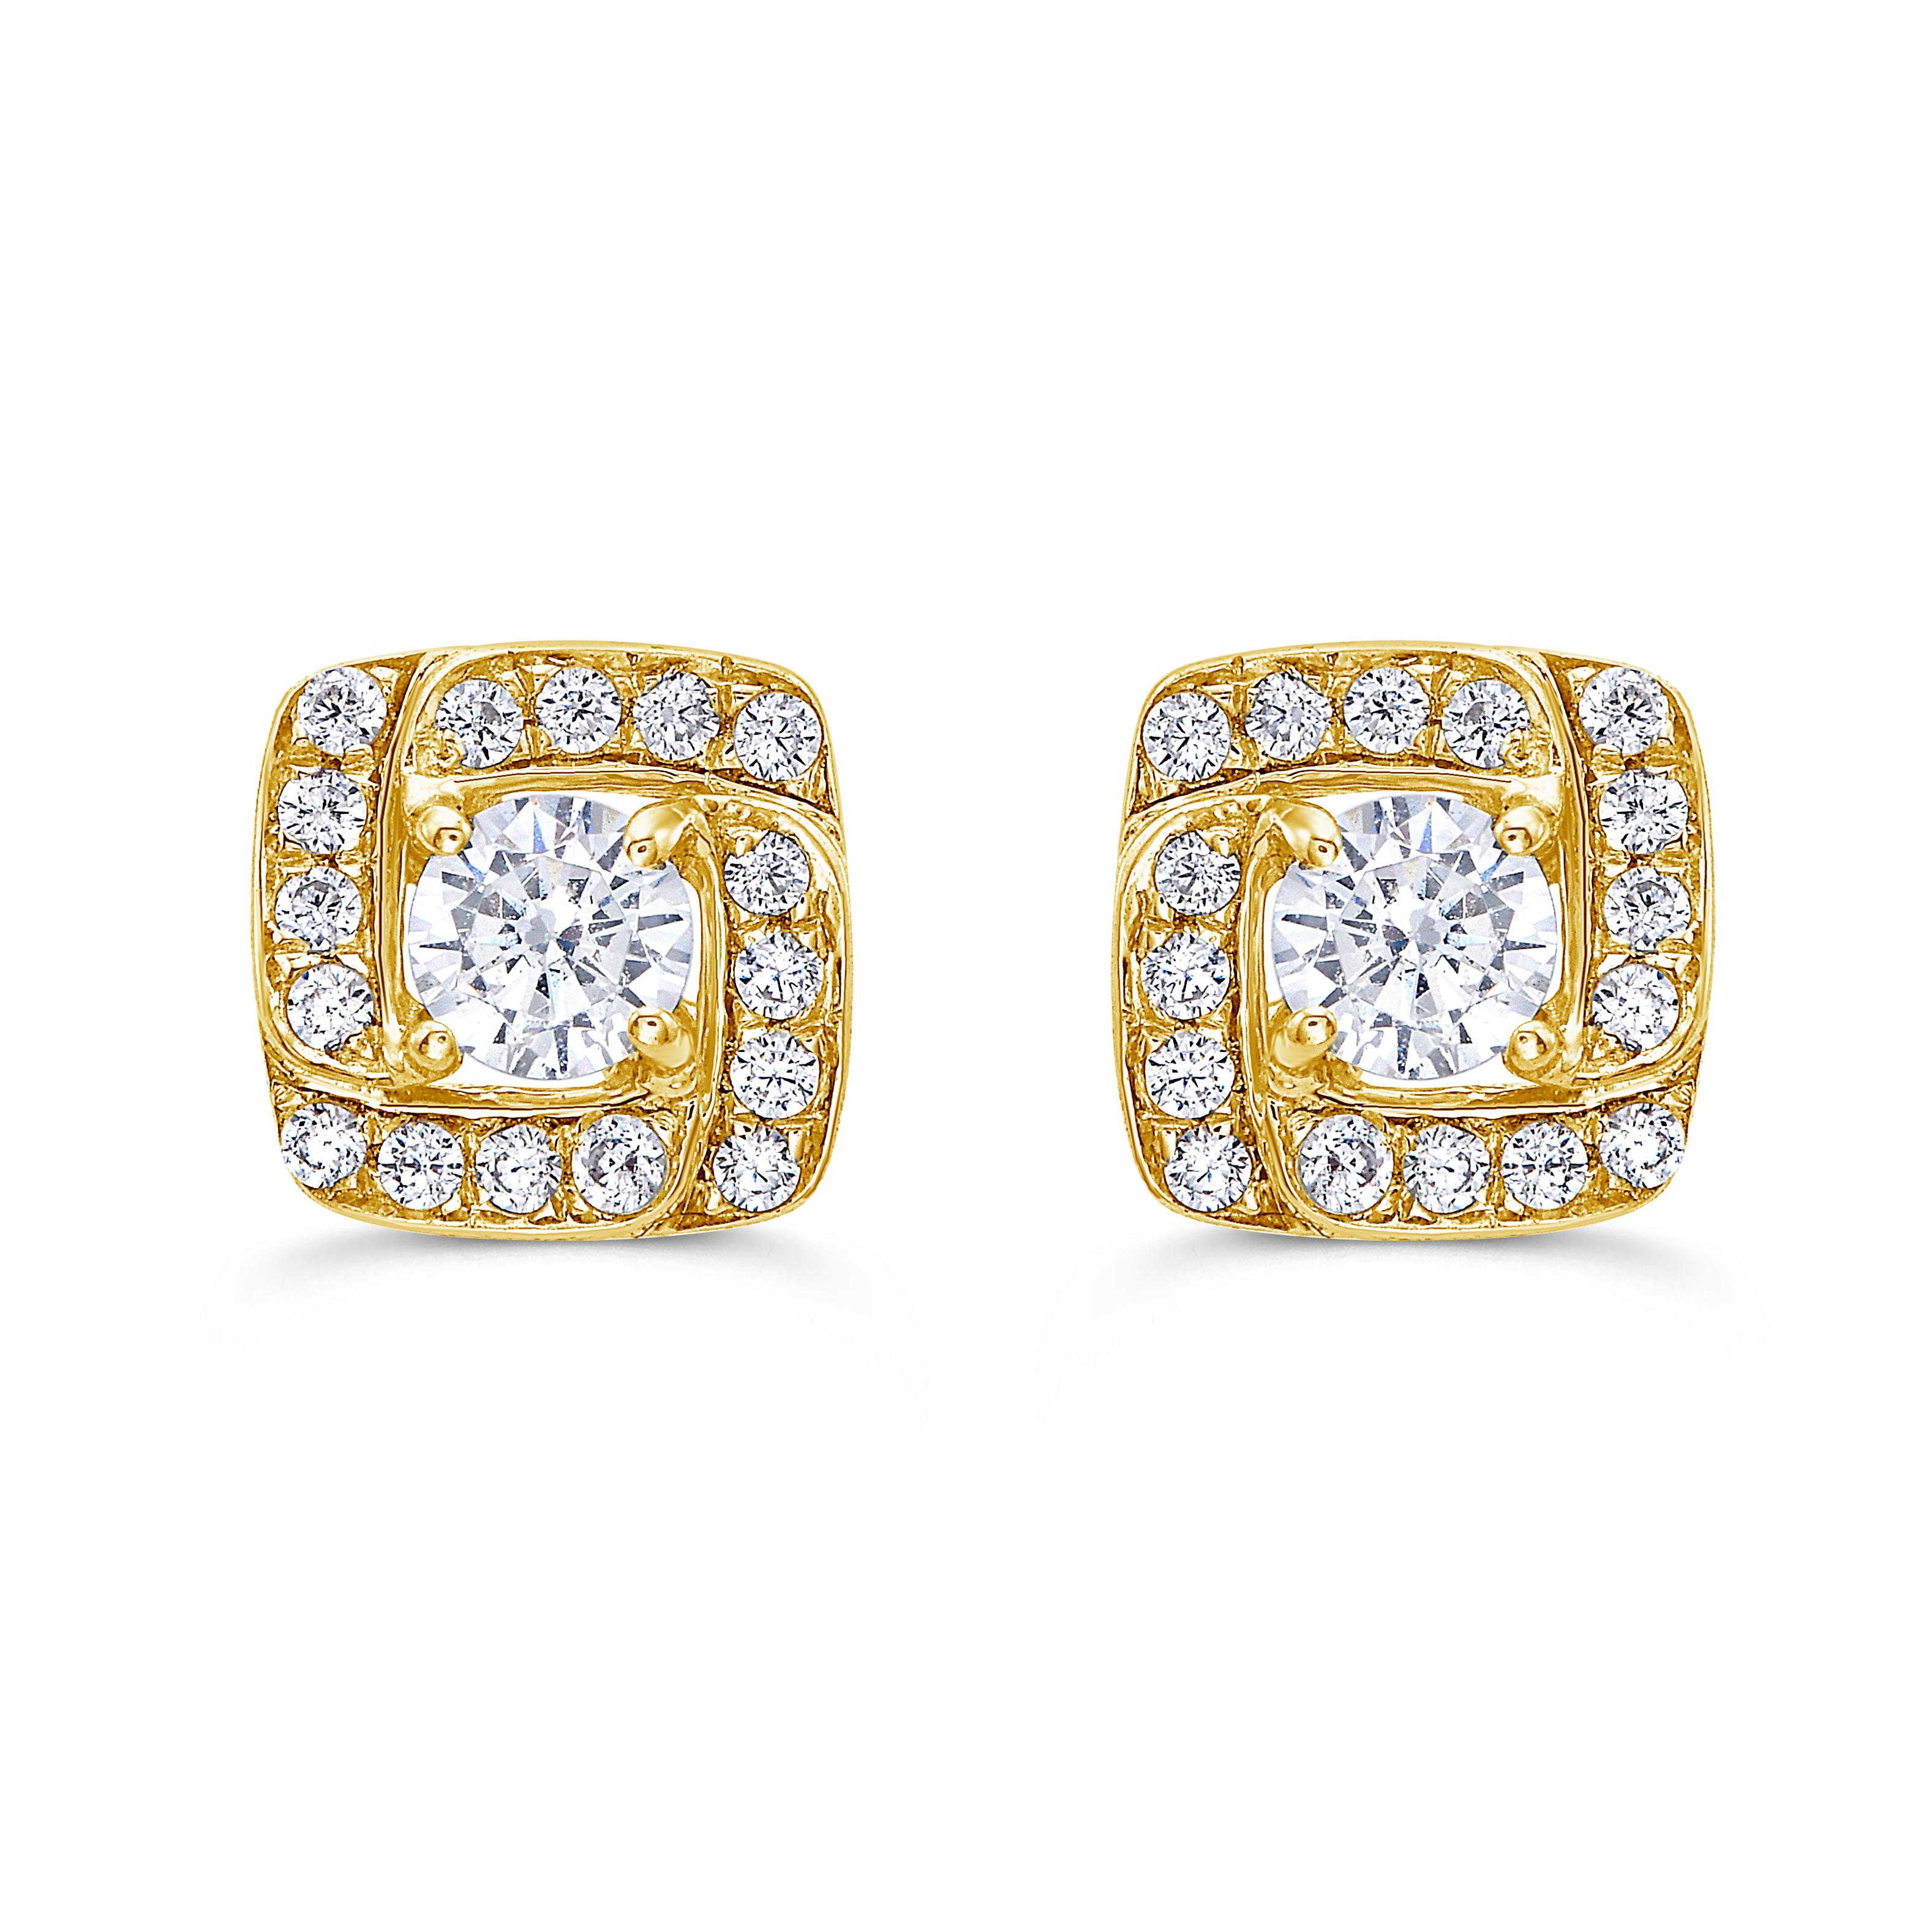 Indulge in elegance with our Diamond Halo Stud Earrings. Handcrafted by a renowned jewelry designer, the 14k yellow gold and dazzling diamonds make these studs a luxurious addition to your everyday collection. Perfect for gifts, these diamond